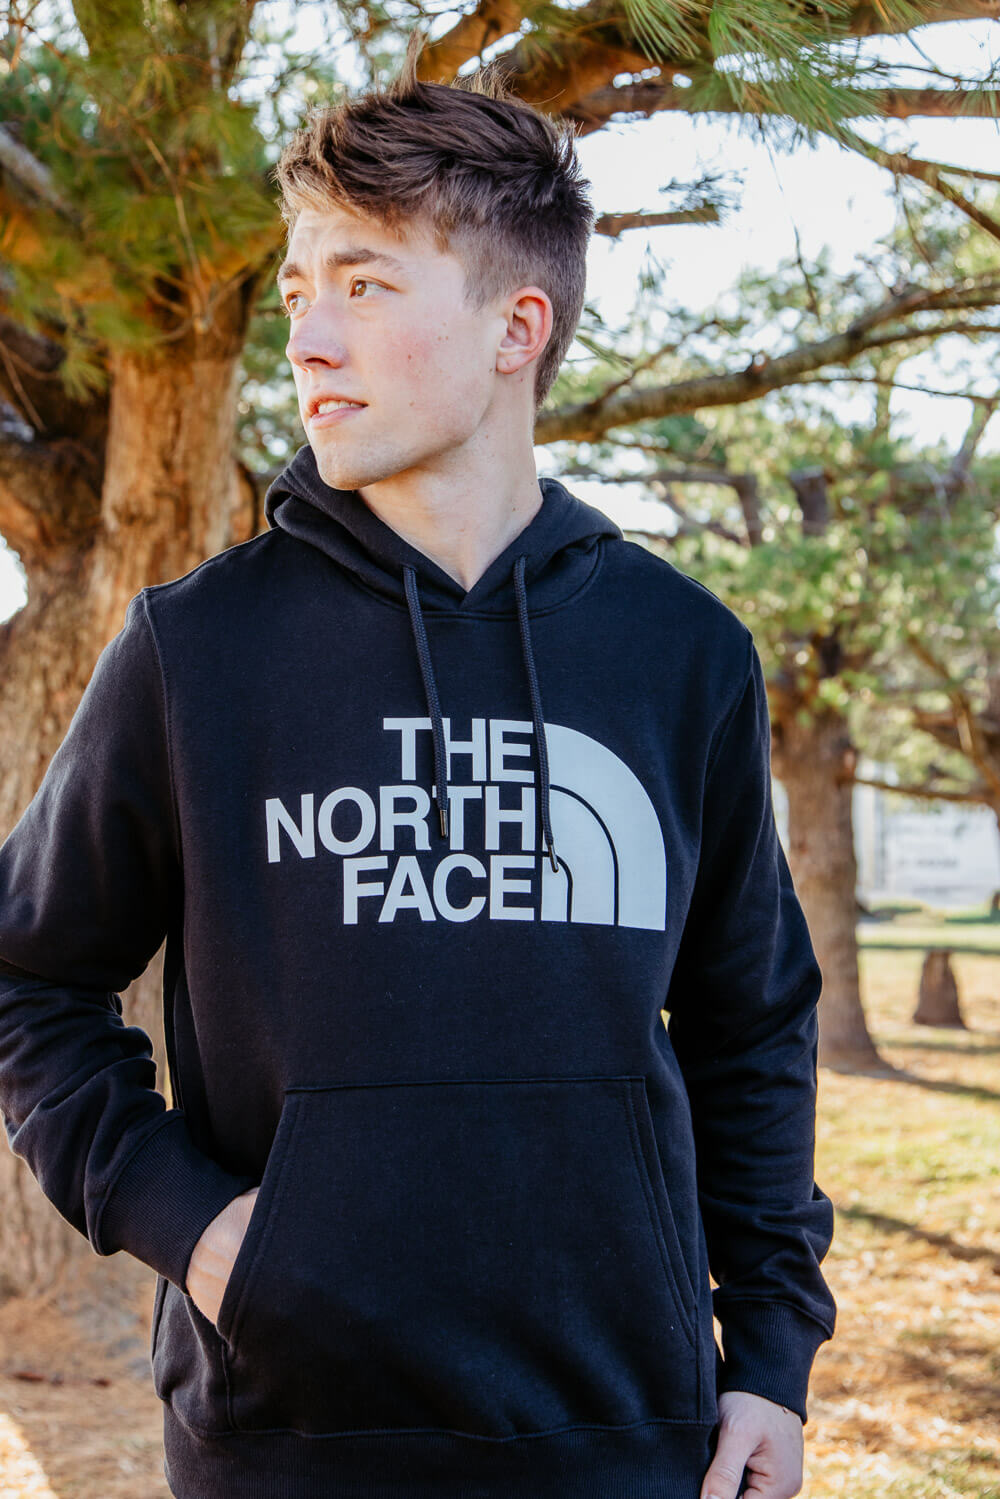 The North Face Half Dome Hoodie for Men in Black